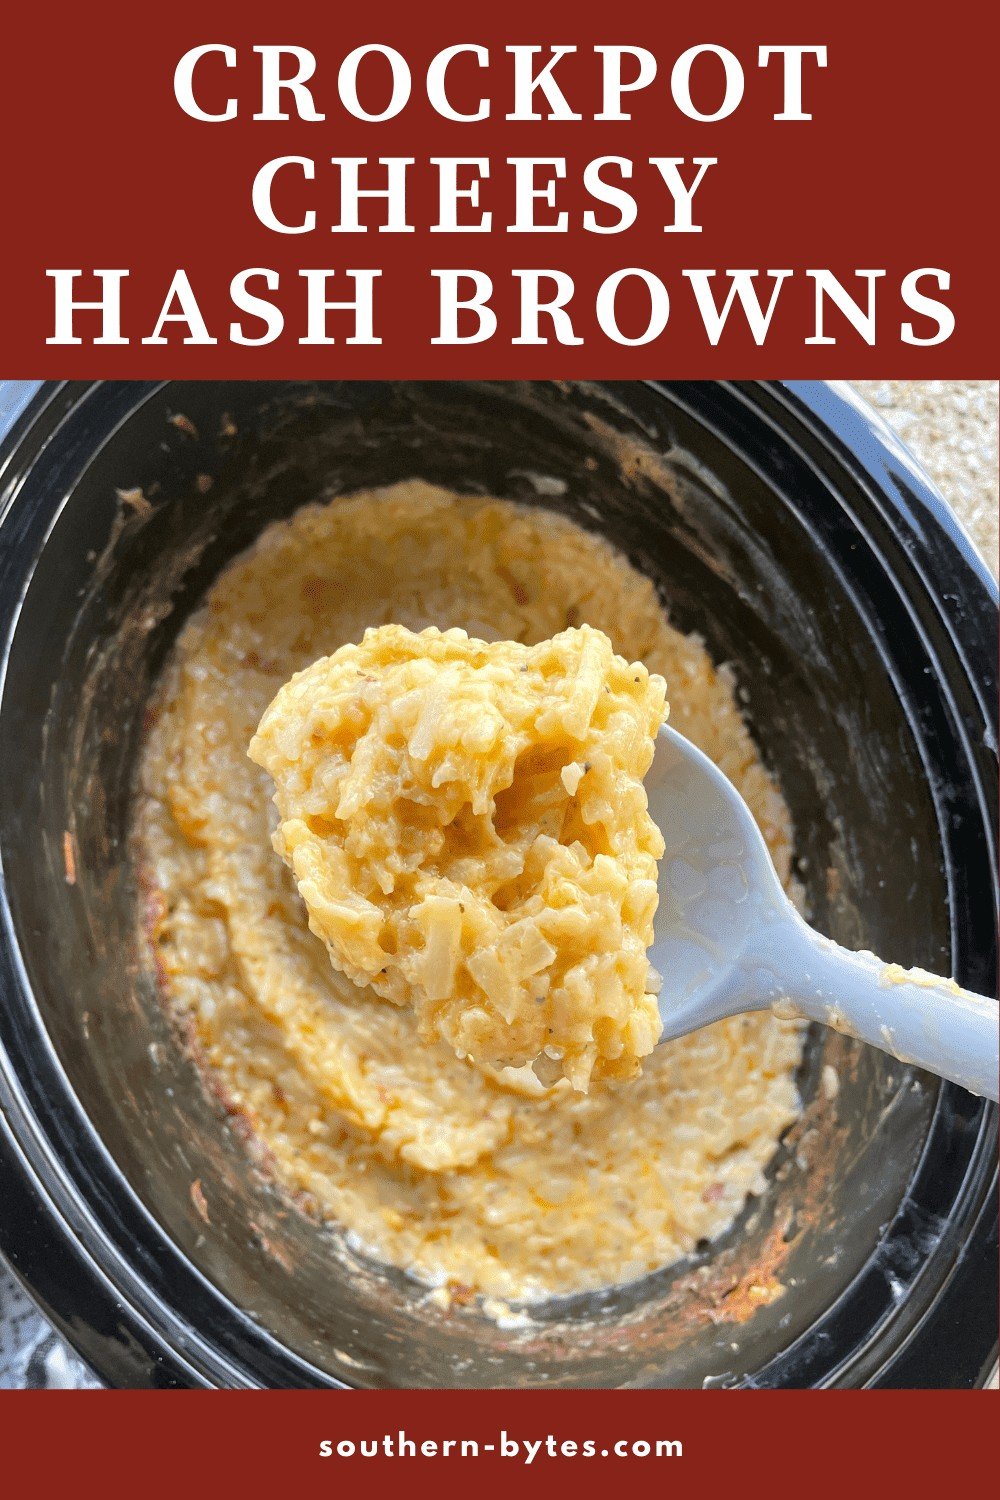 A pin image of a spoon of crockpot cheesy hash browns over a crockpot.